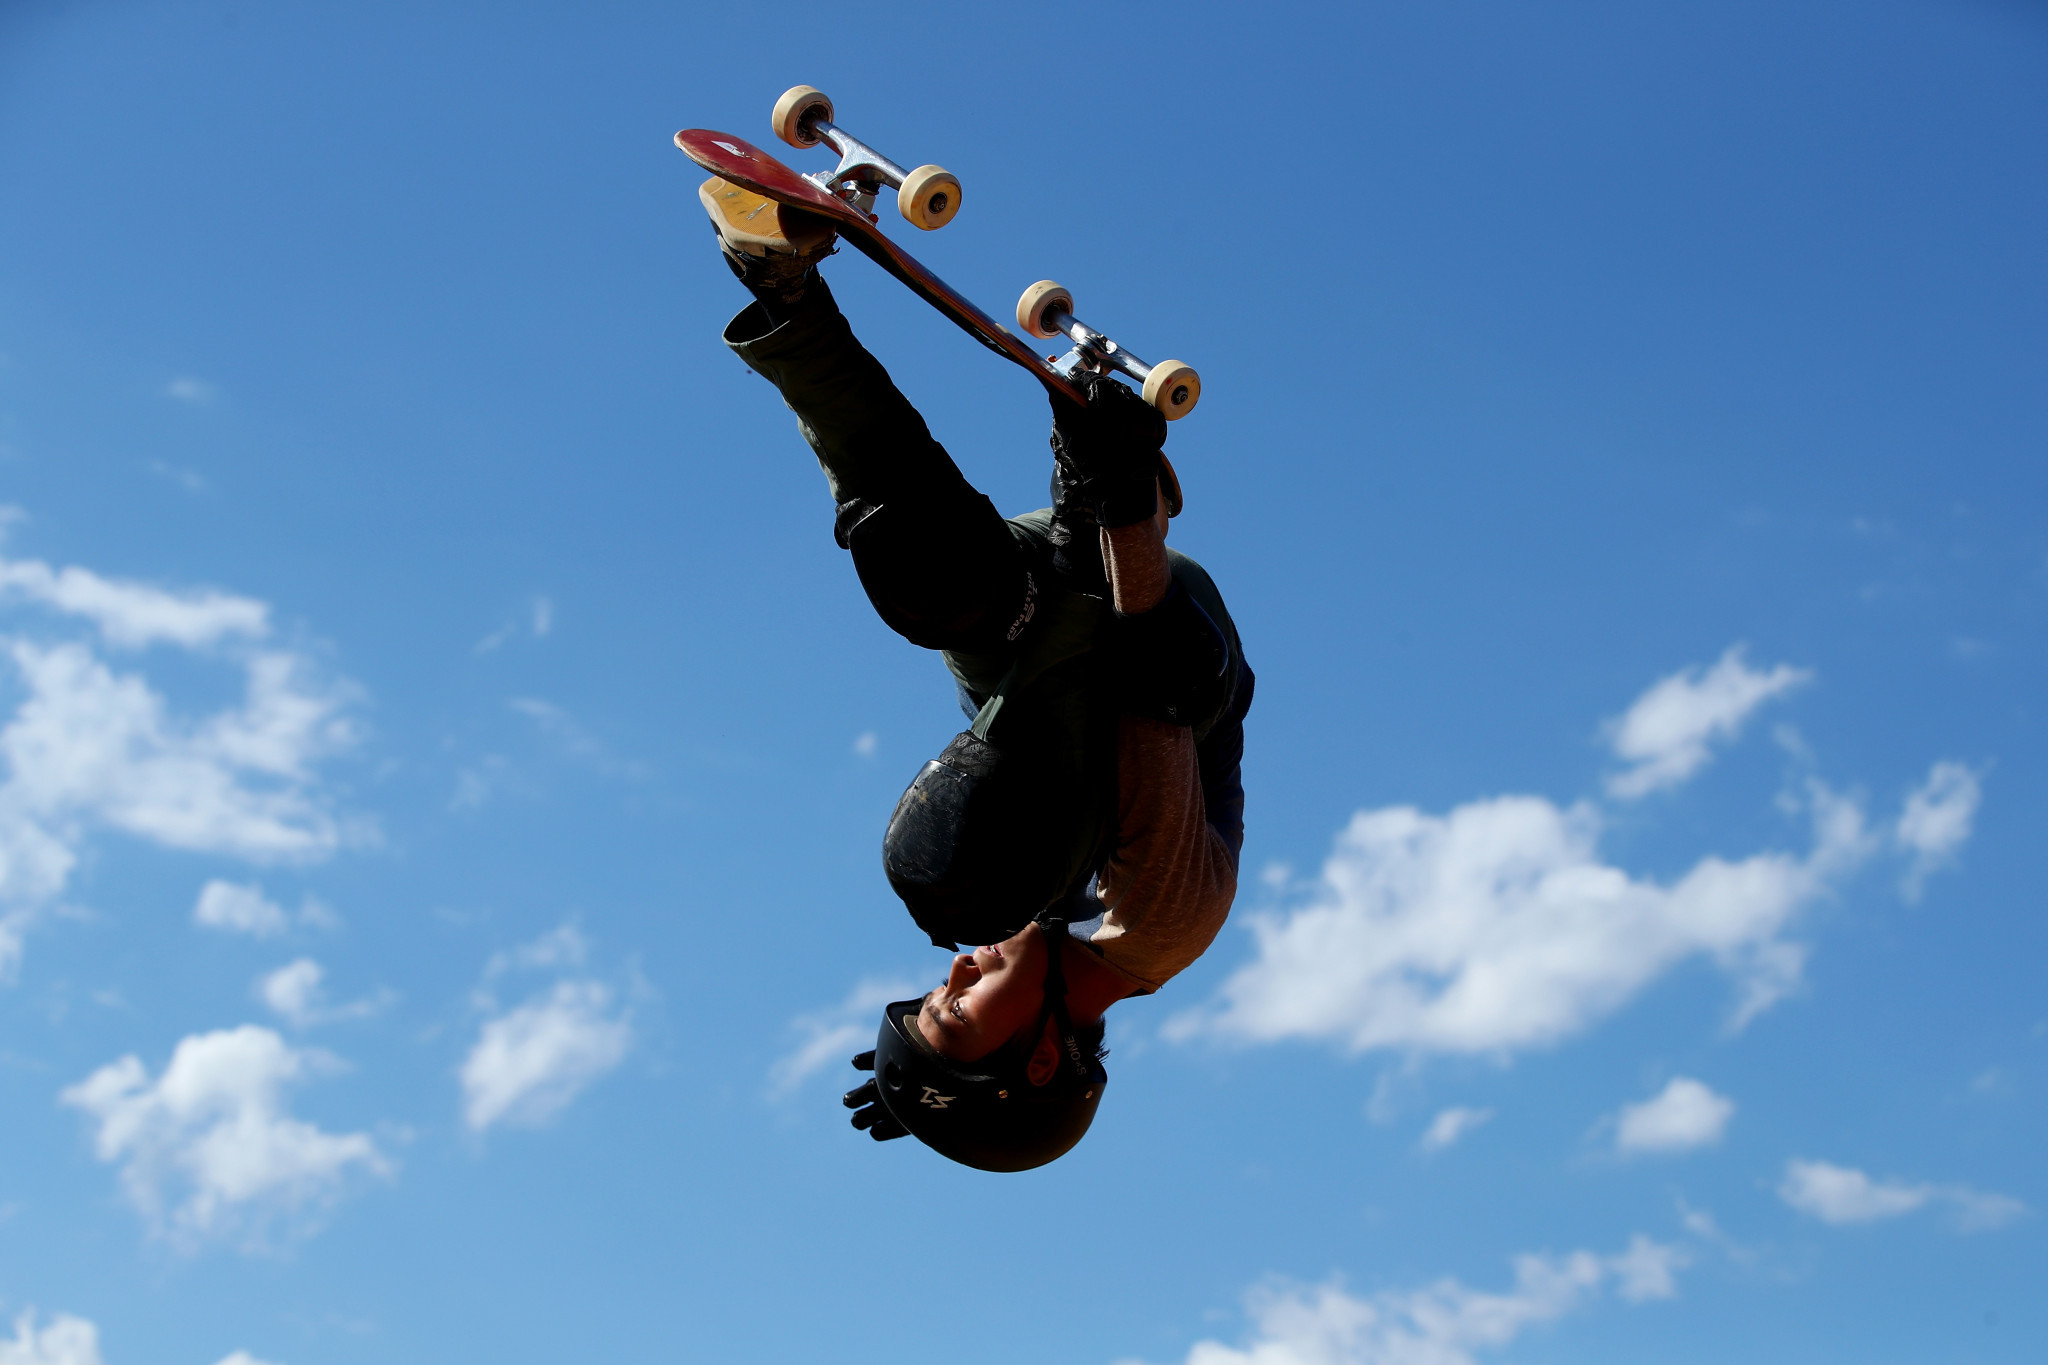 Park skateboarding will make its Olympic debut at Tokyo 2020 ©Getty Images